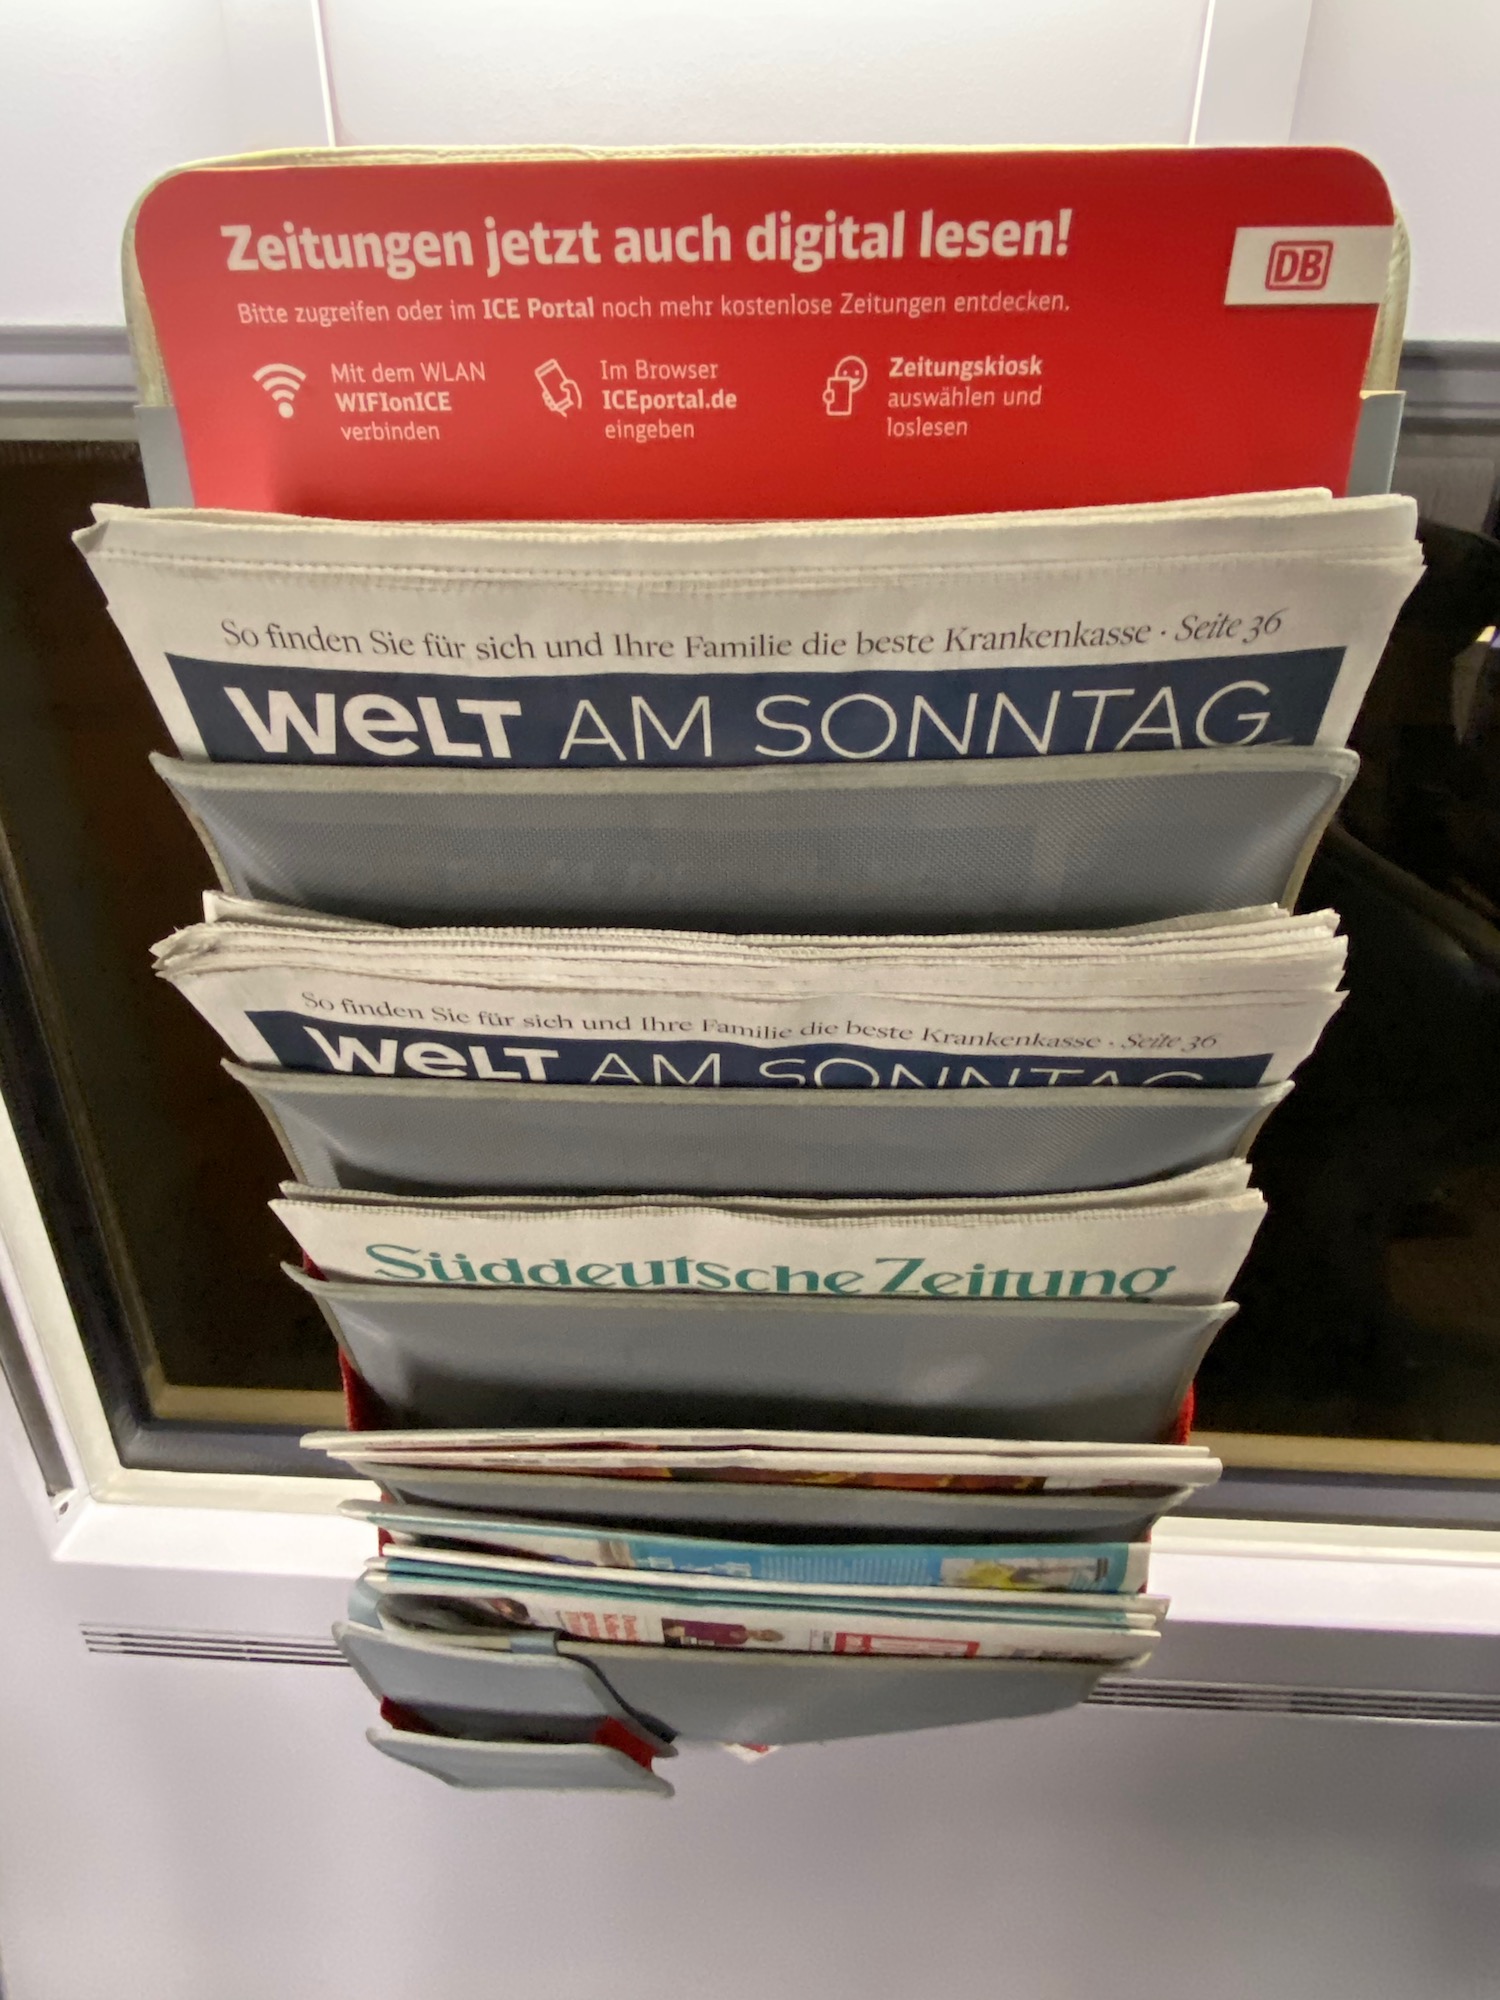 a stack of newspapers in a rack